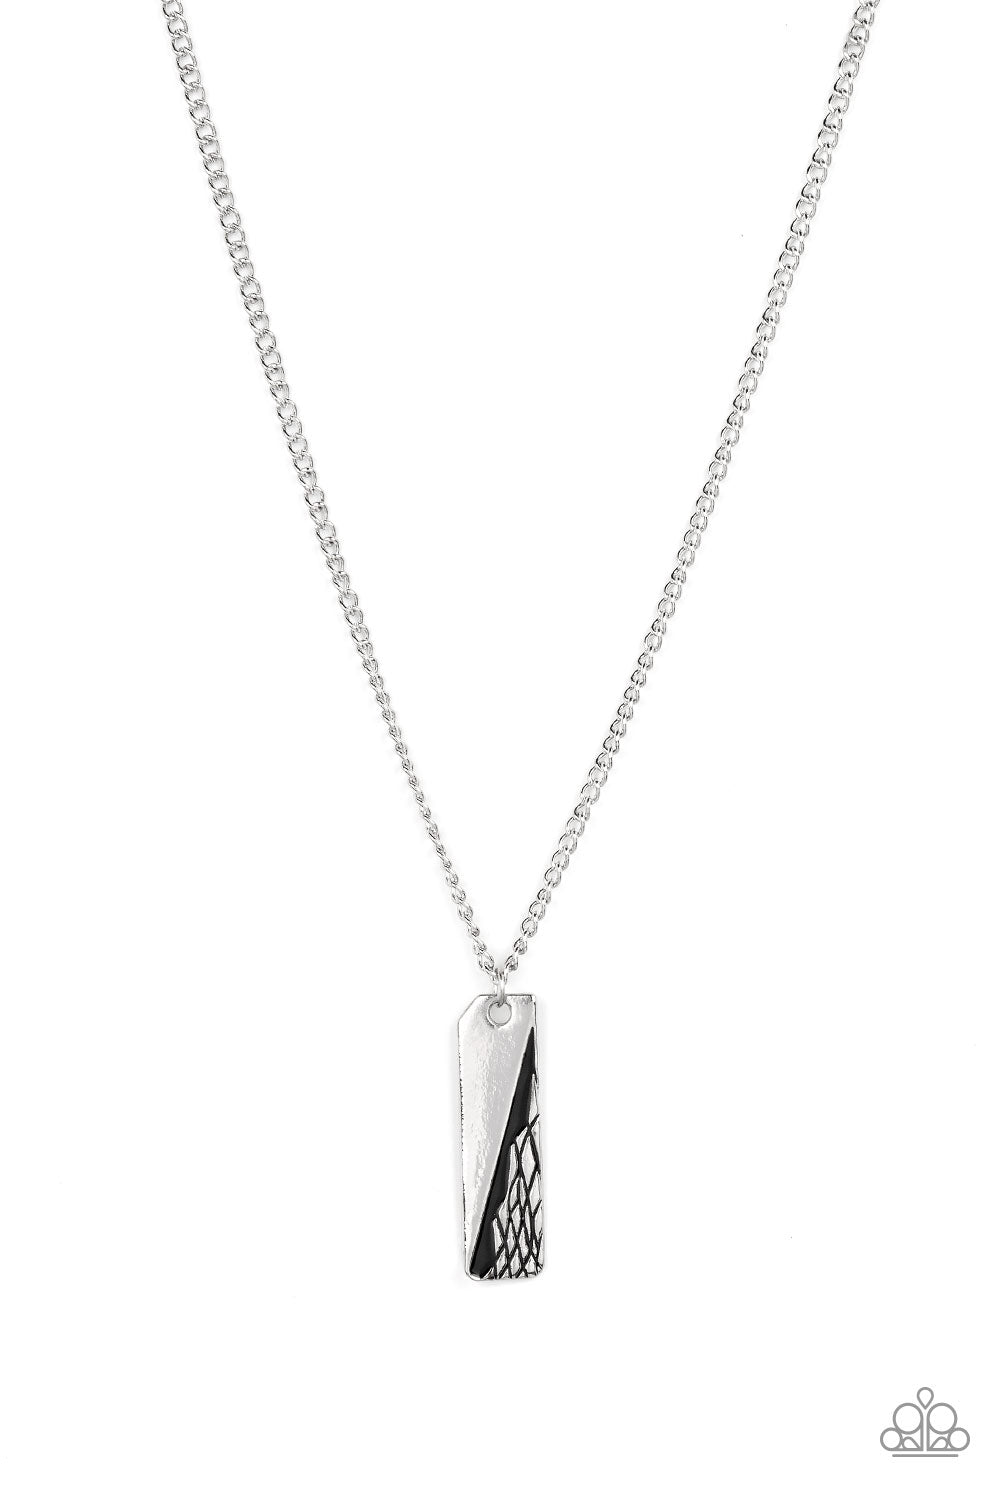 Tag Along - Silver Necklace